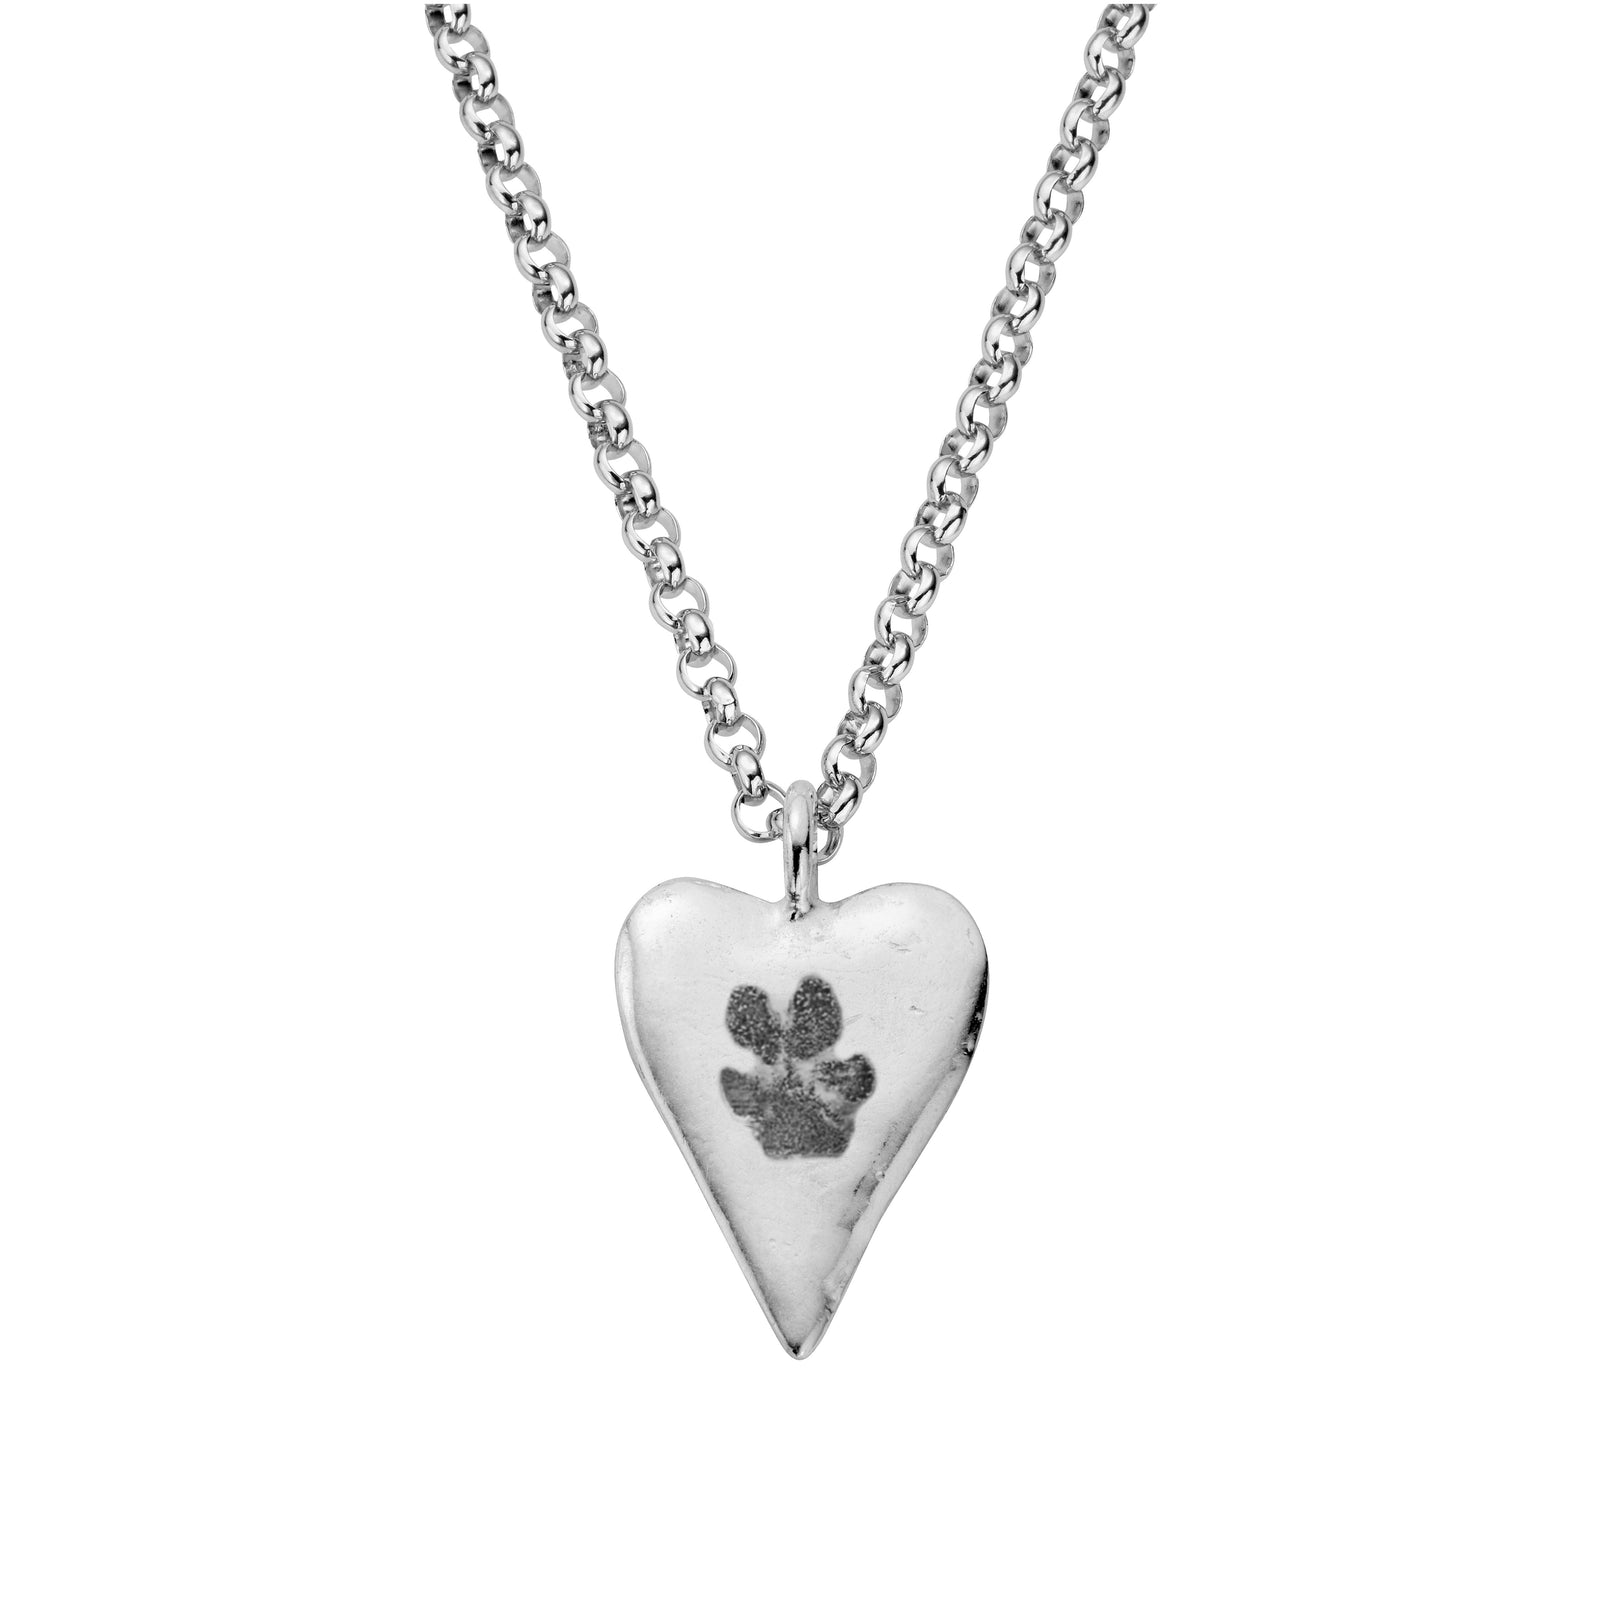 Silver Maxi Heart Necklace with Paw Print